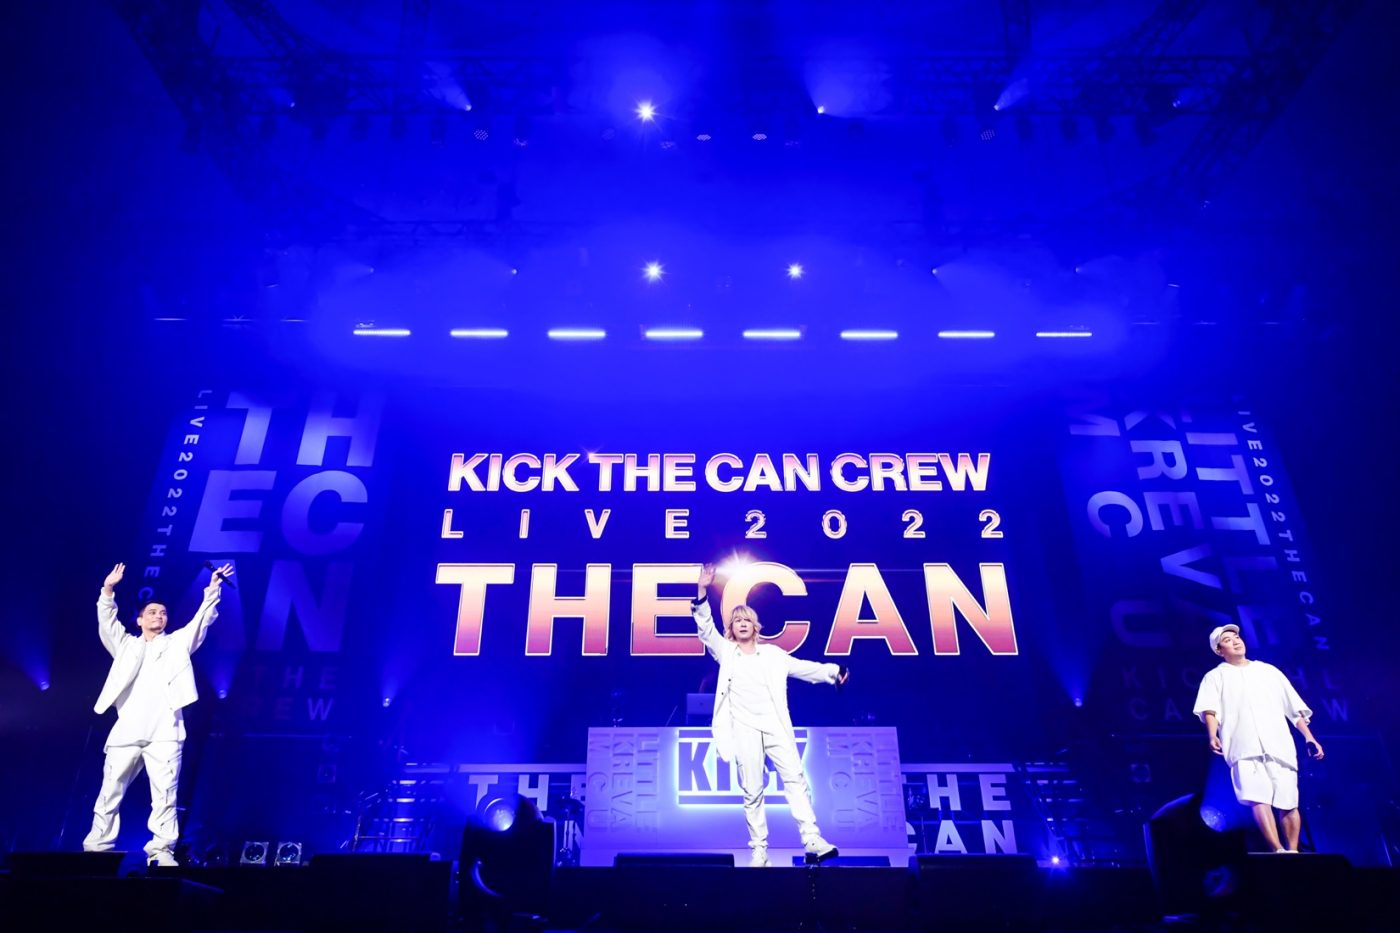 KICK THE CAN CREW、最新アルバム『THE CAN』を引っさげた東名阪ツアーが日本武道館にて見事完結 - 画像一覧（4/4）